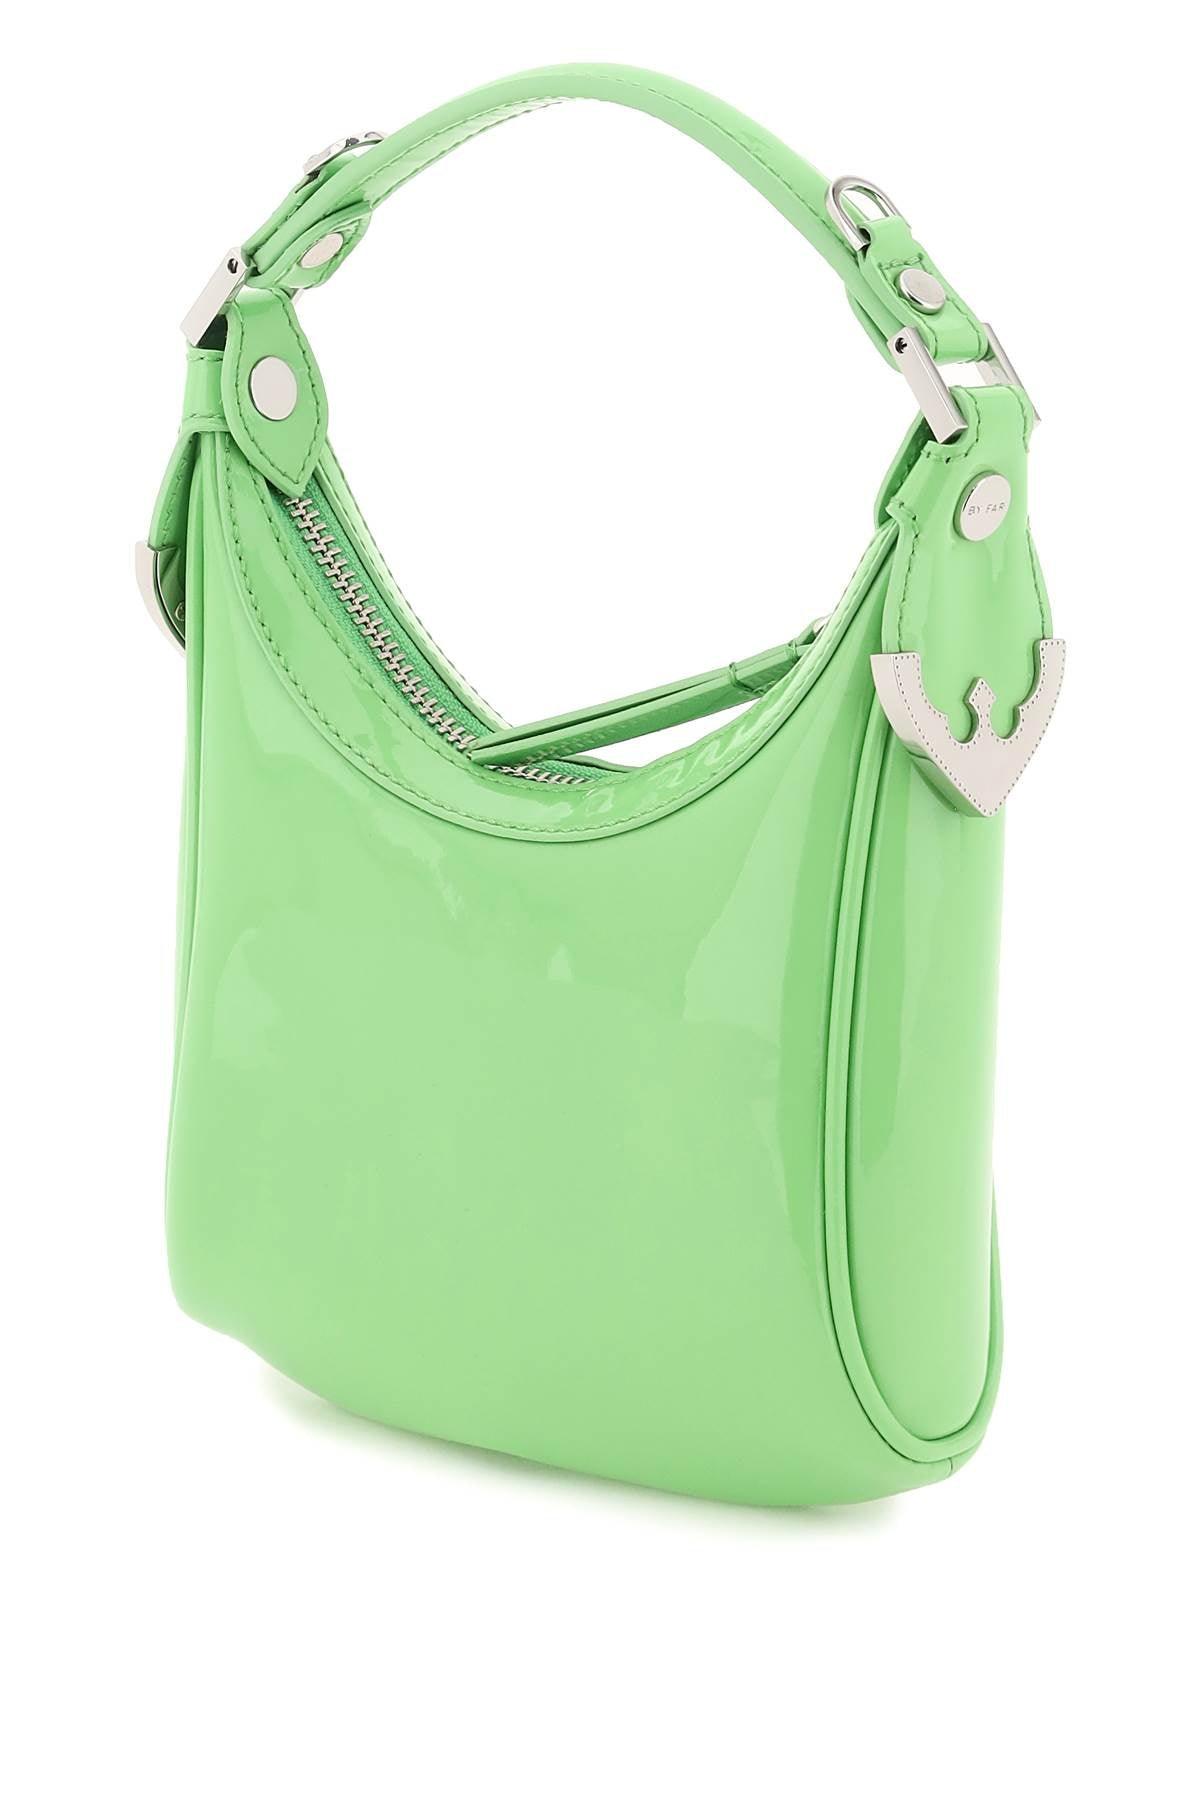 By Far Patent Leather 'Cosmo' Bag - JOHN JULIA